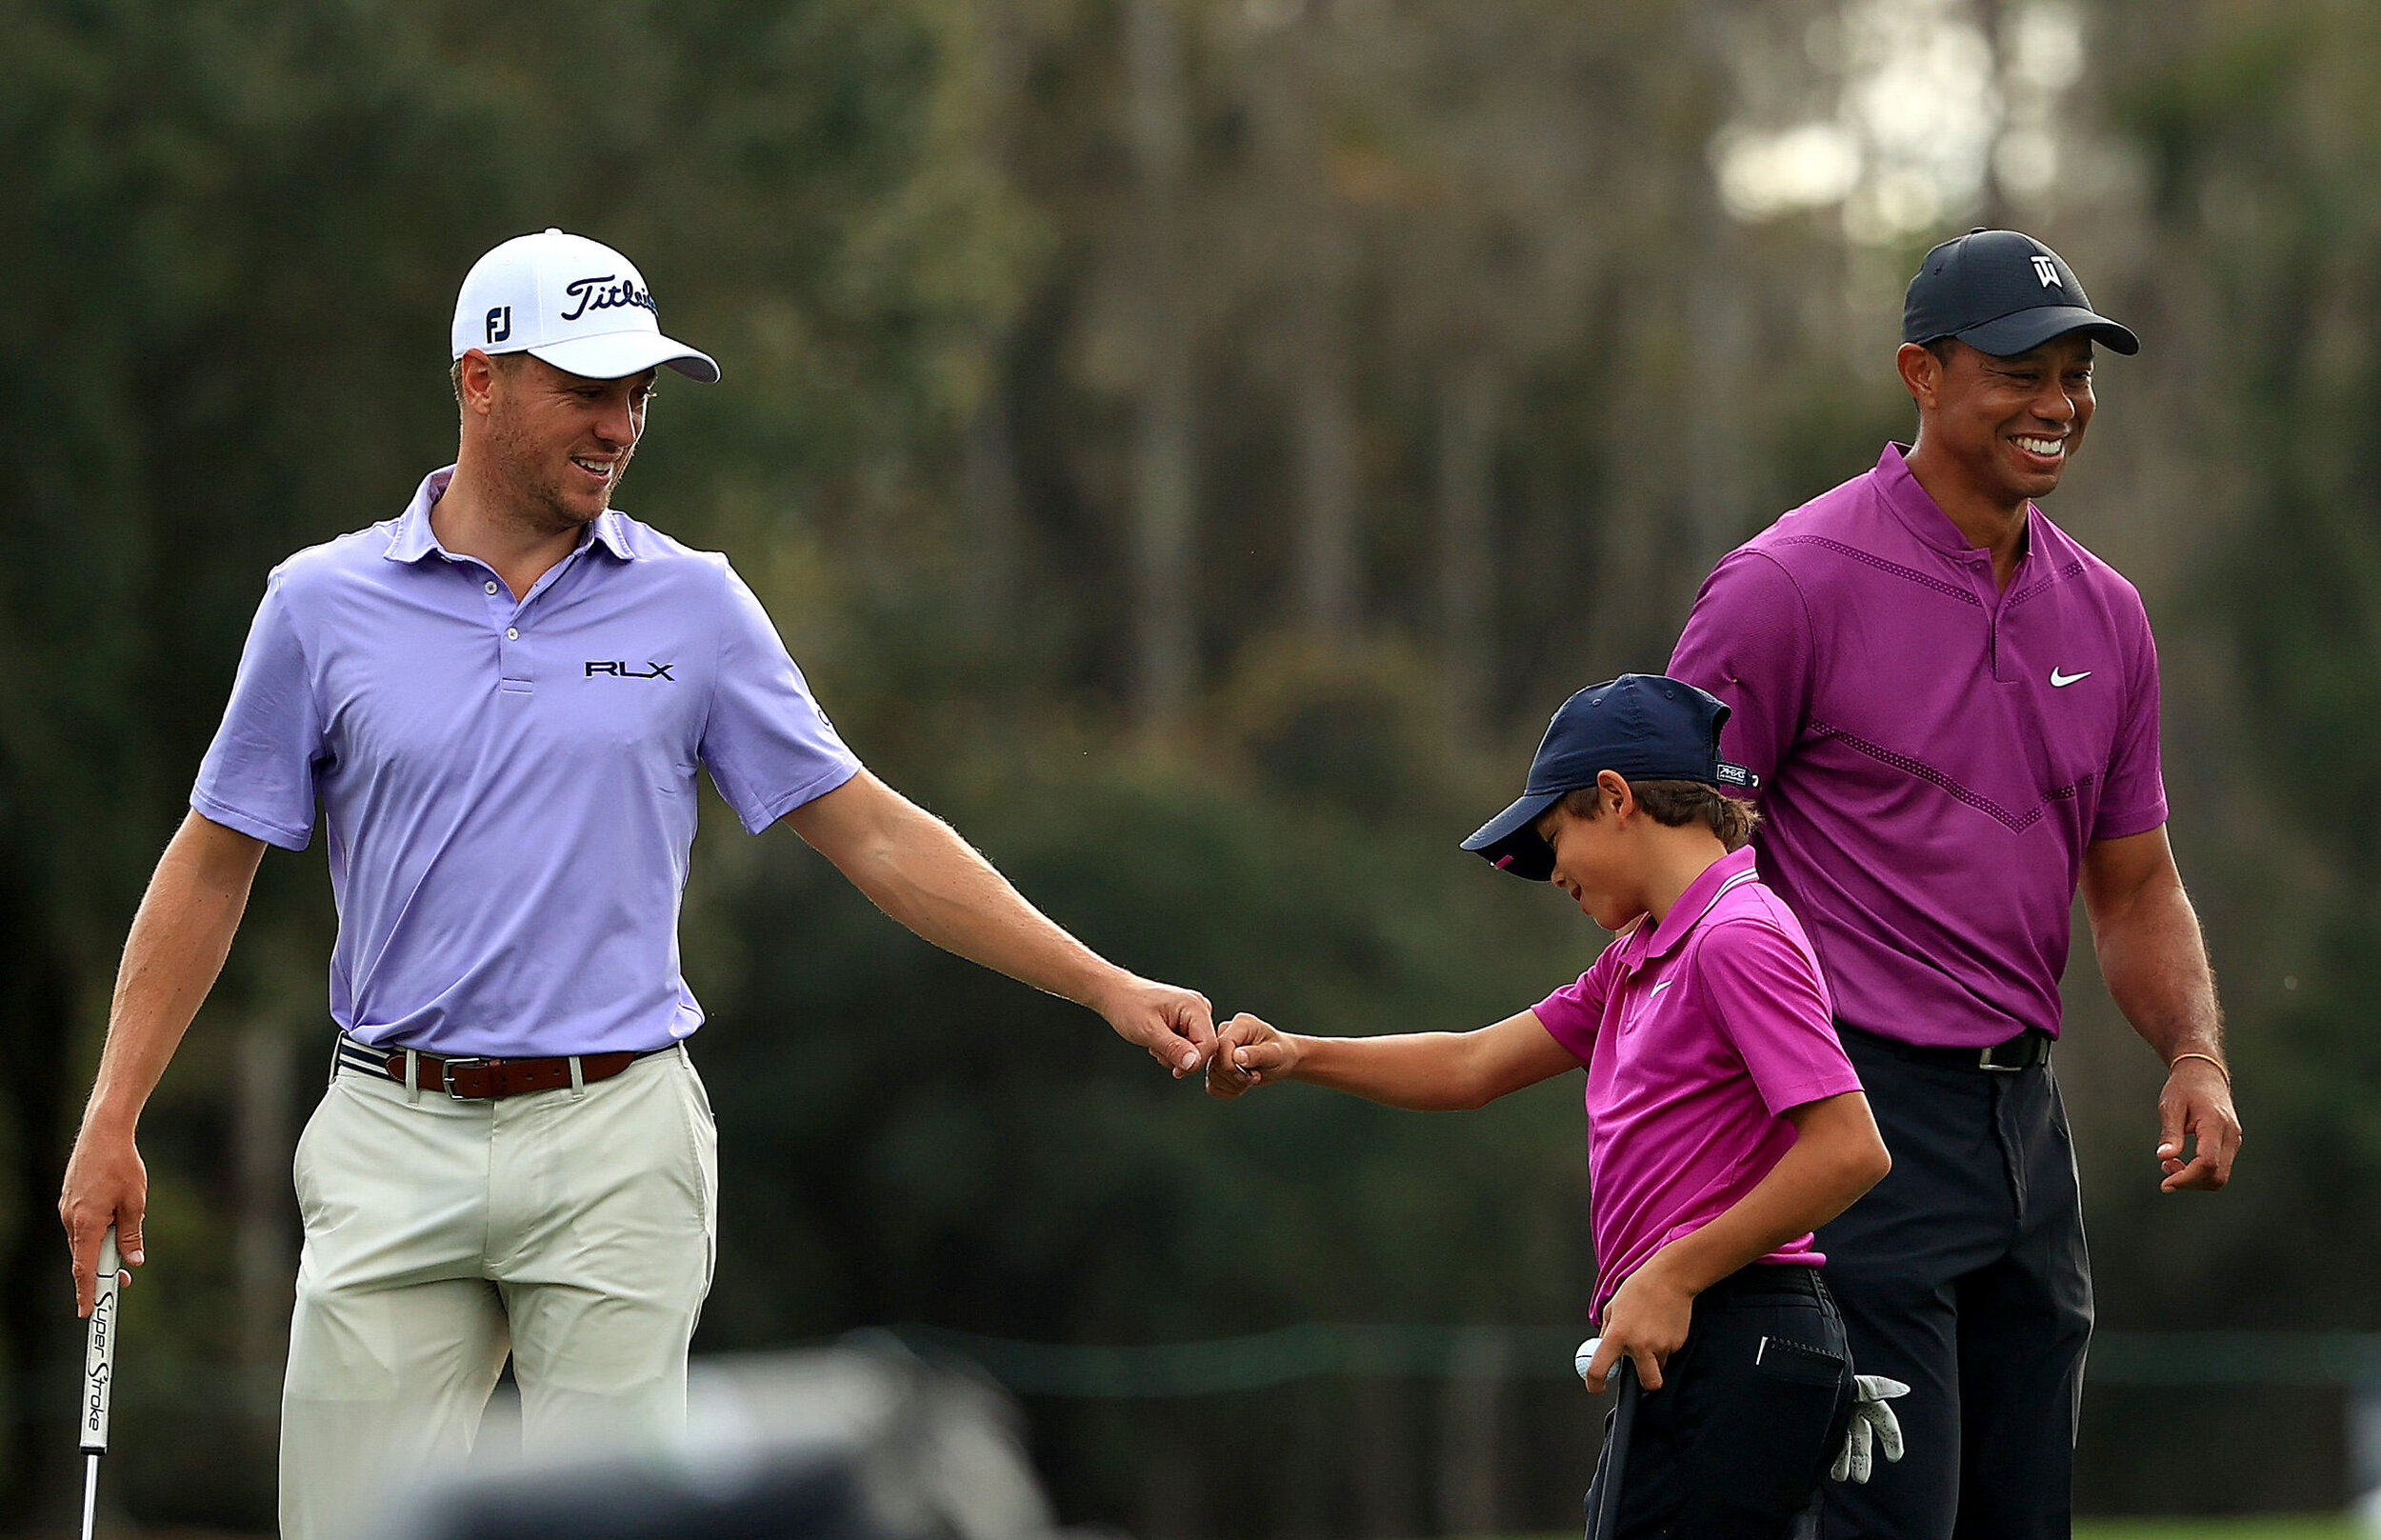  ORLANDO, FLORIDA - DECEMBER 19: Tiger Woods of the United States' son Charlie Woods high five Justin Thomas of the United States on the ninth hole during the first round of the PNC Championship at the Ritz Carlton Golf Club on December 19, 2020 in O